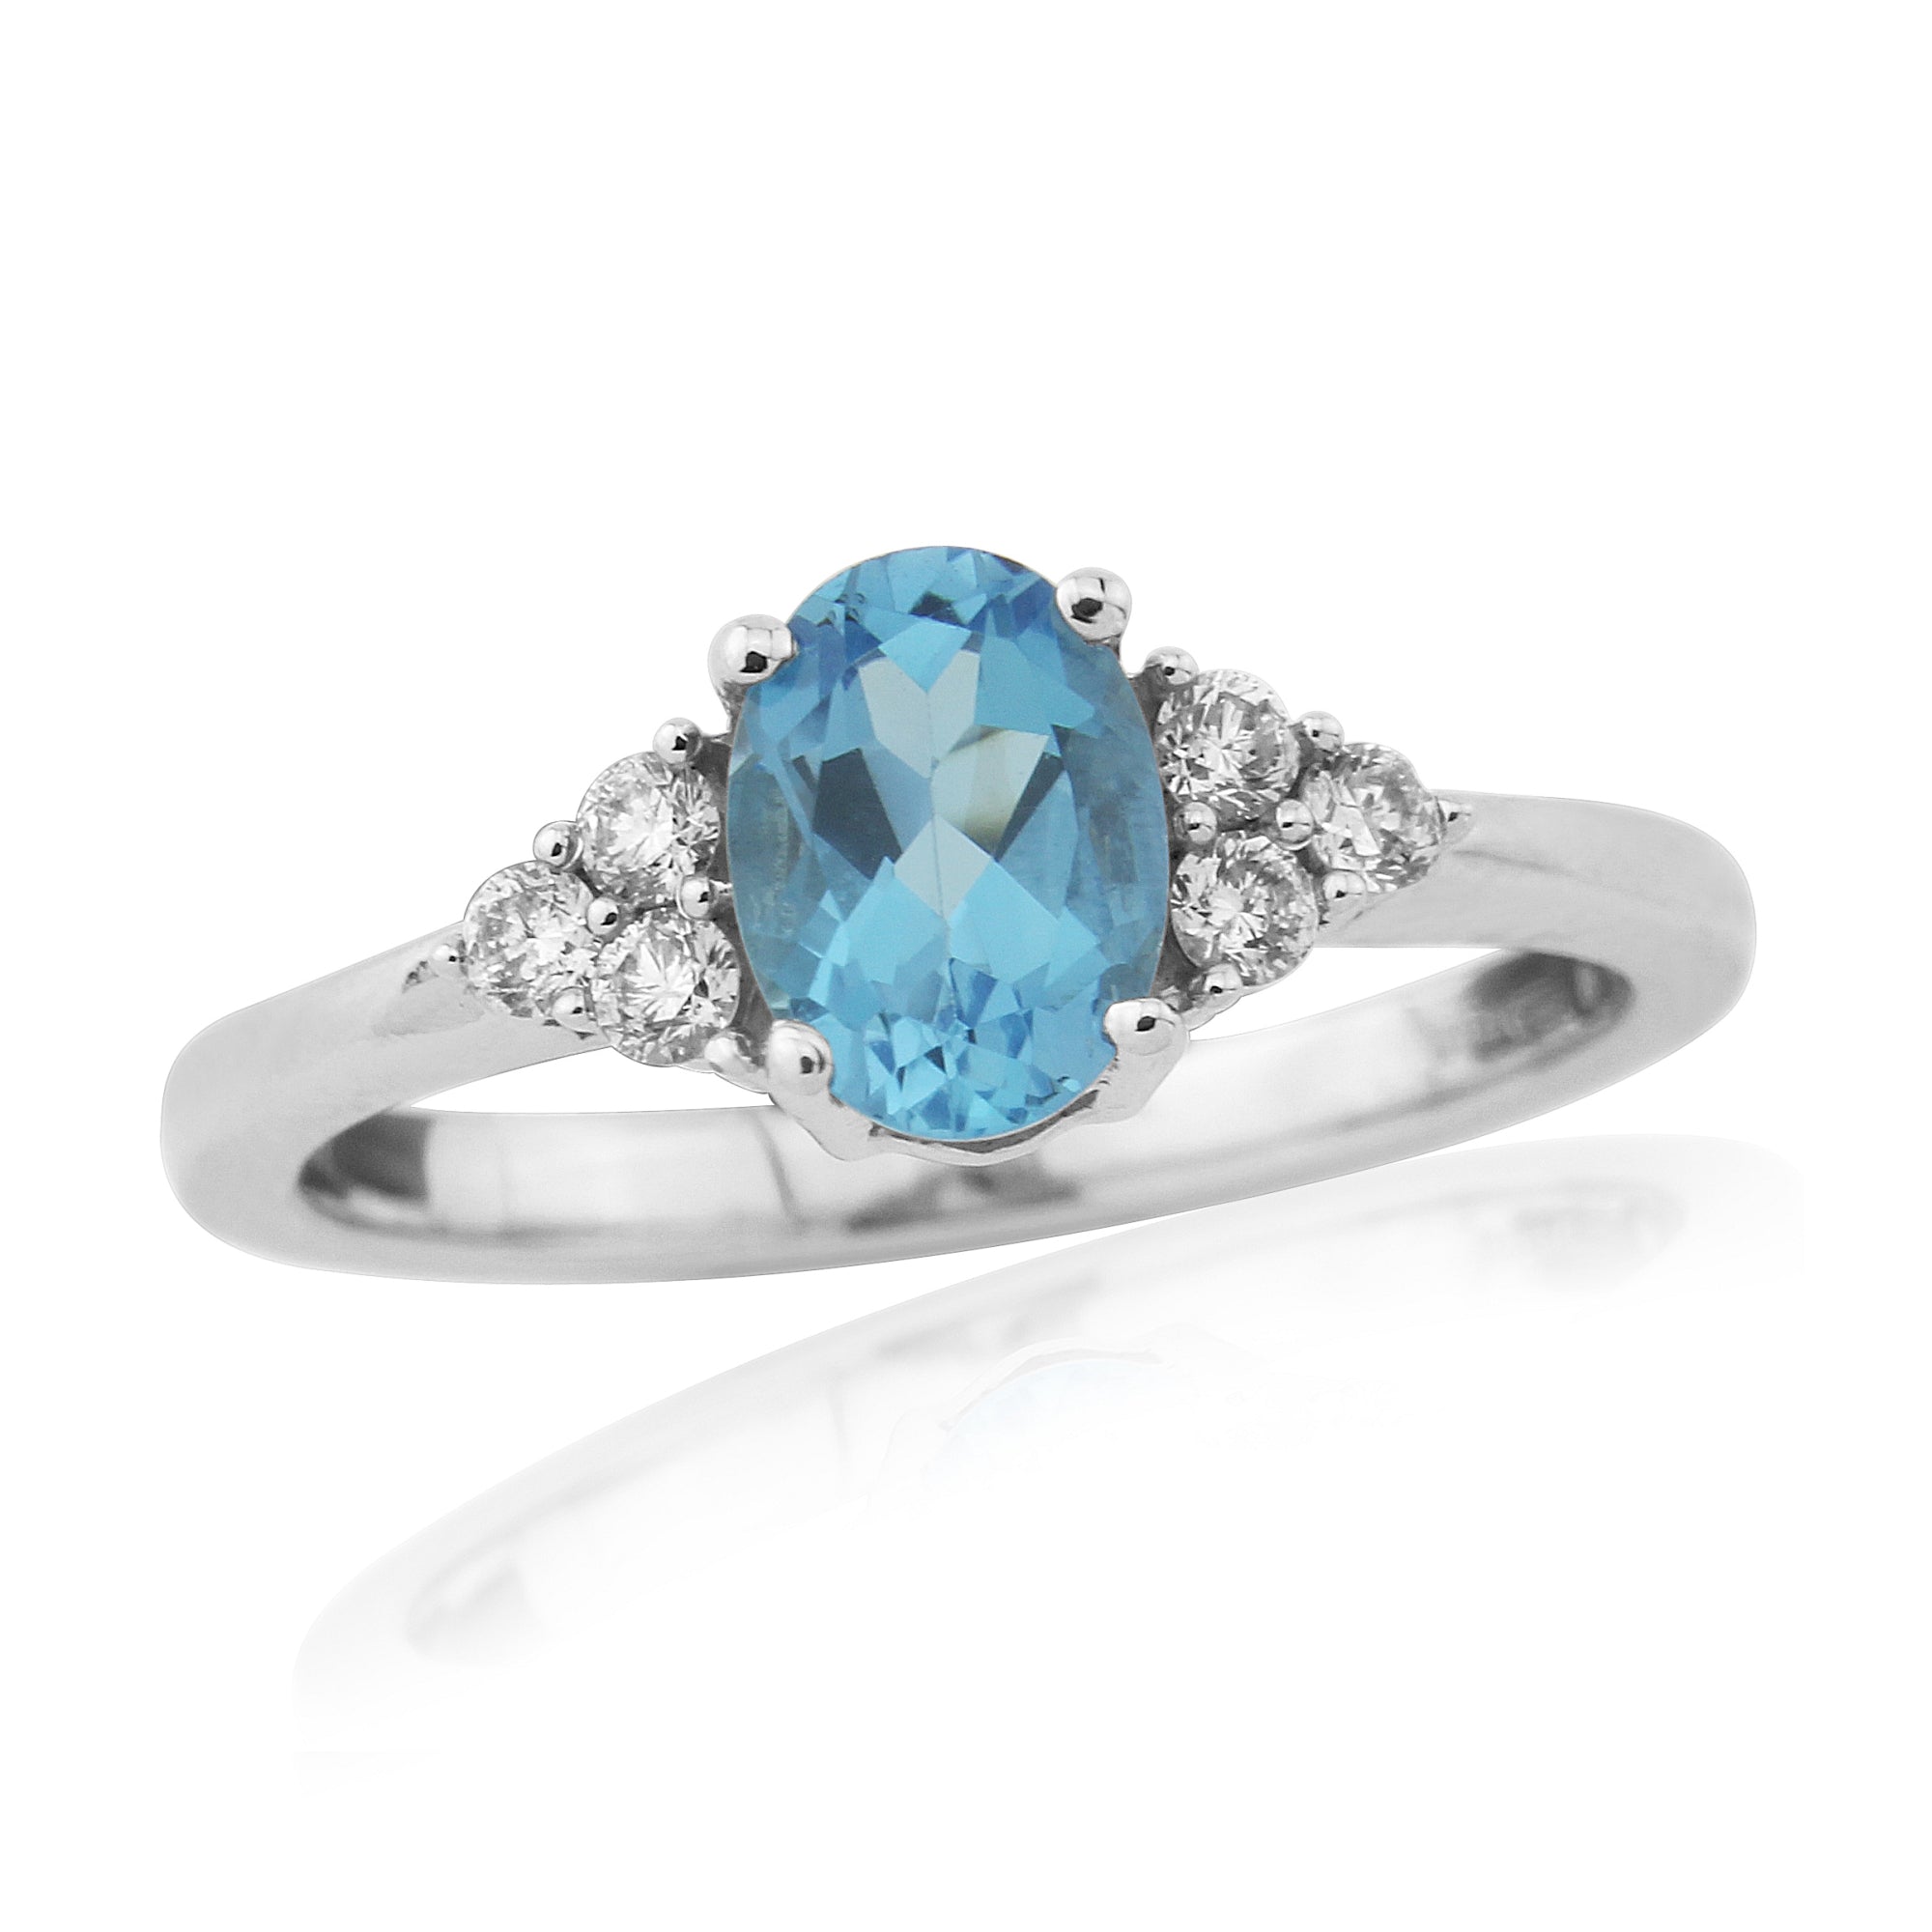 9ct white gold 7x5mm oval blue topaz & triple diamond shoulders ring 0.15ct